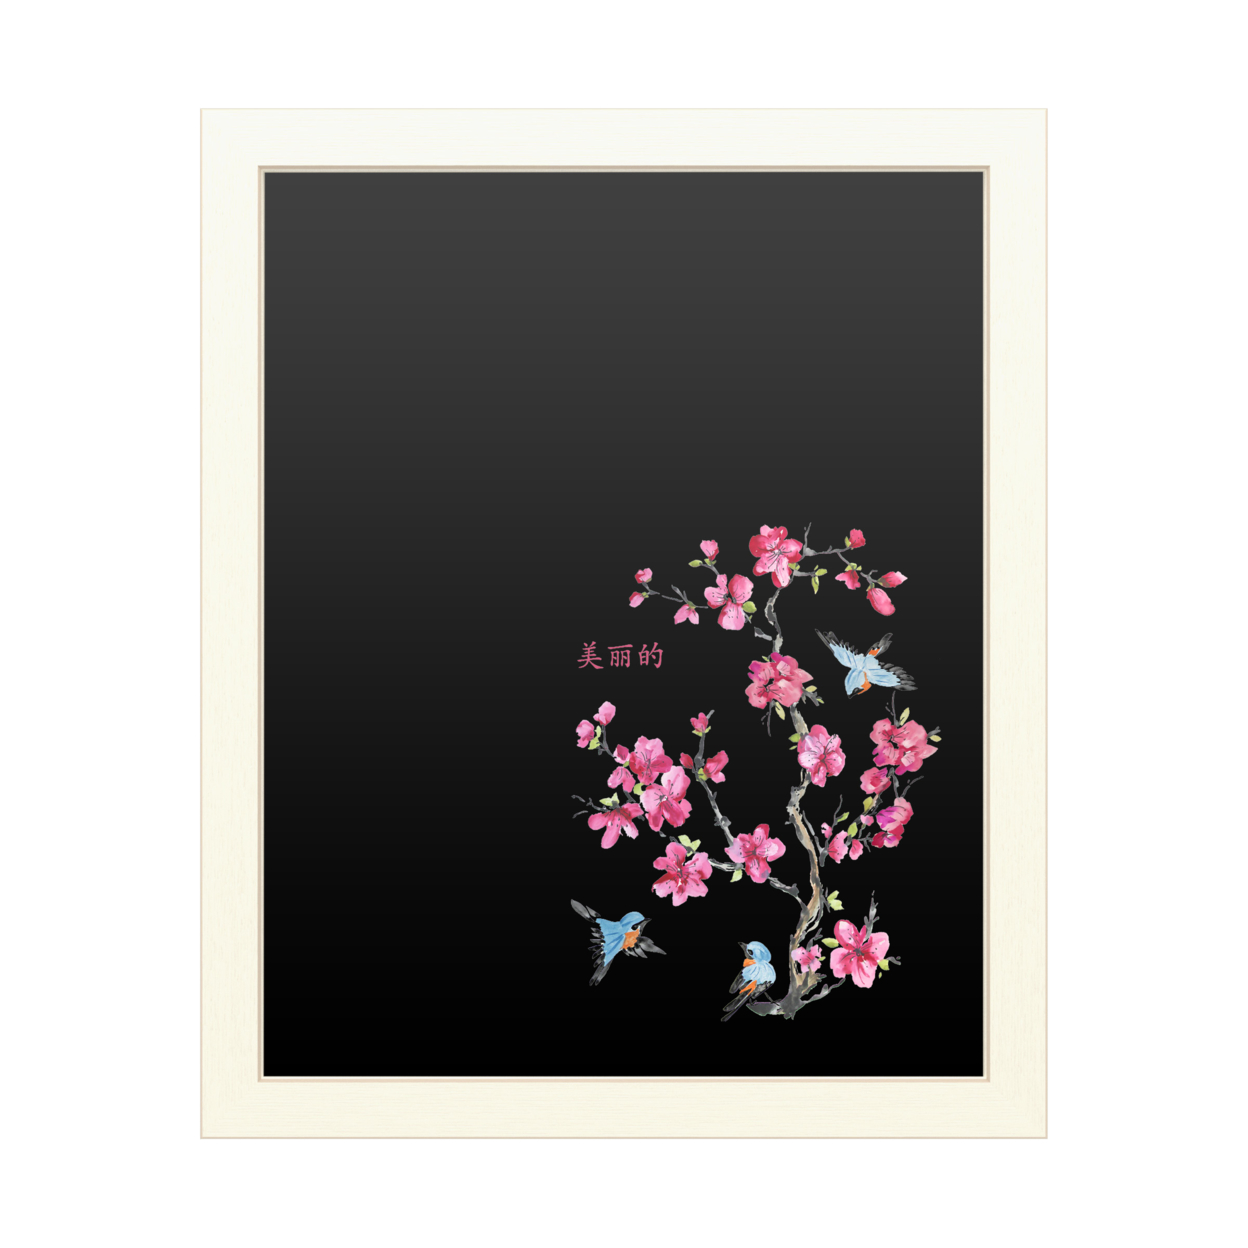 16 X 20 Chalk Board With Printed Artwork - Jean Plout Cherry Blossom Beautiful Birds White Board - Ready To Hang Chalkboard